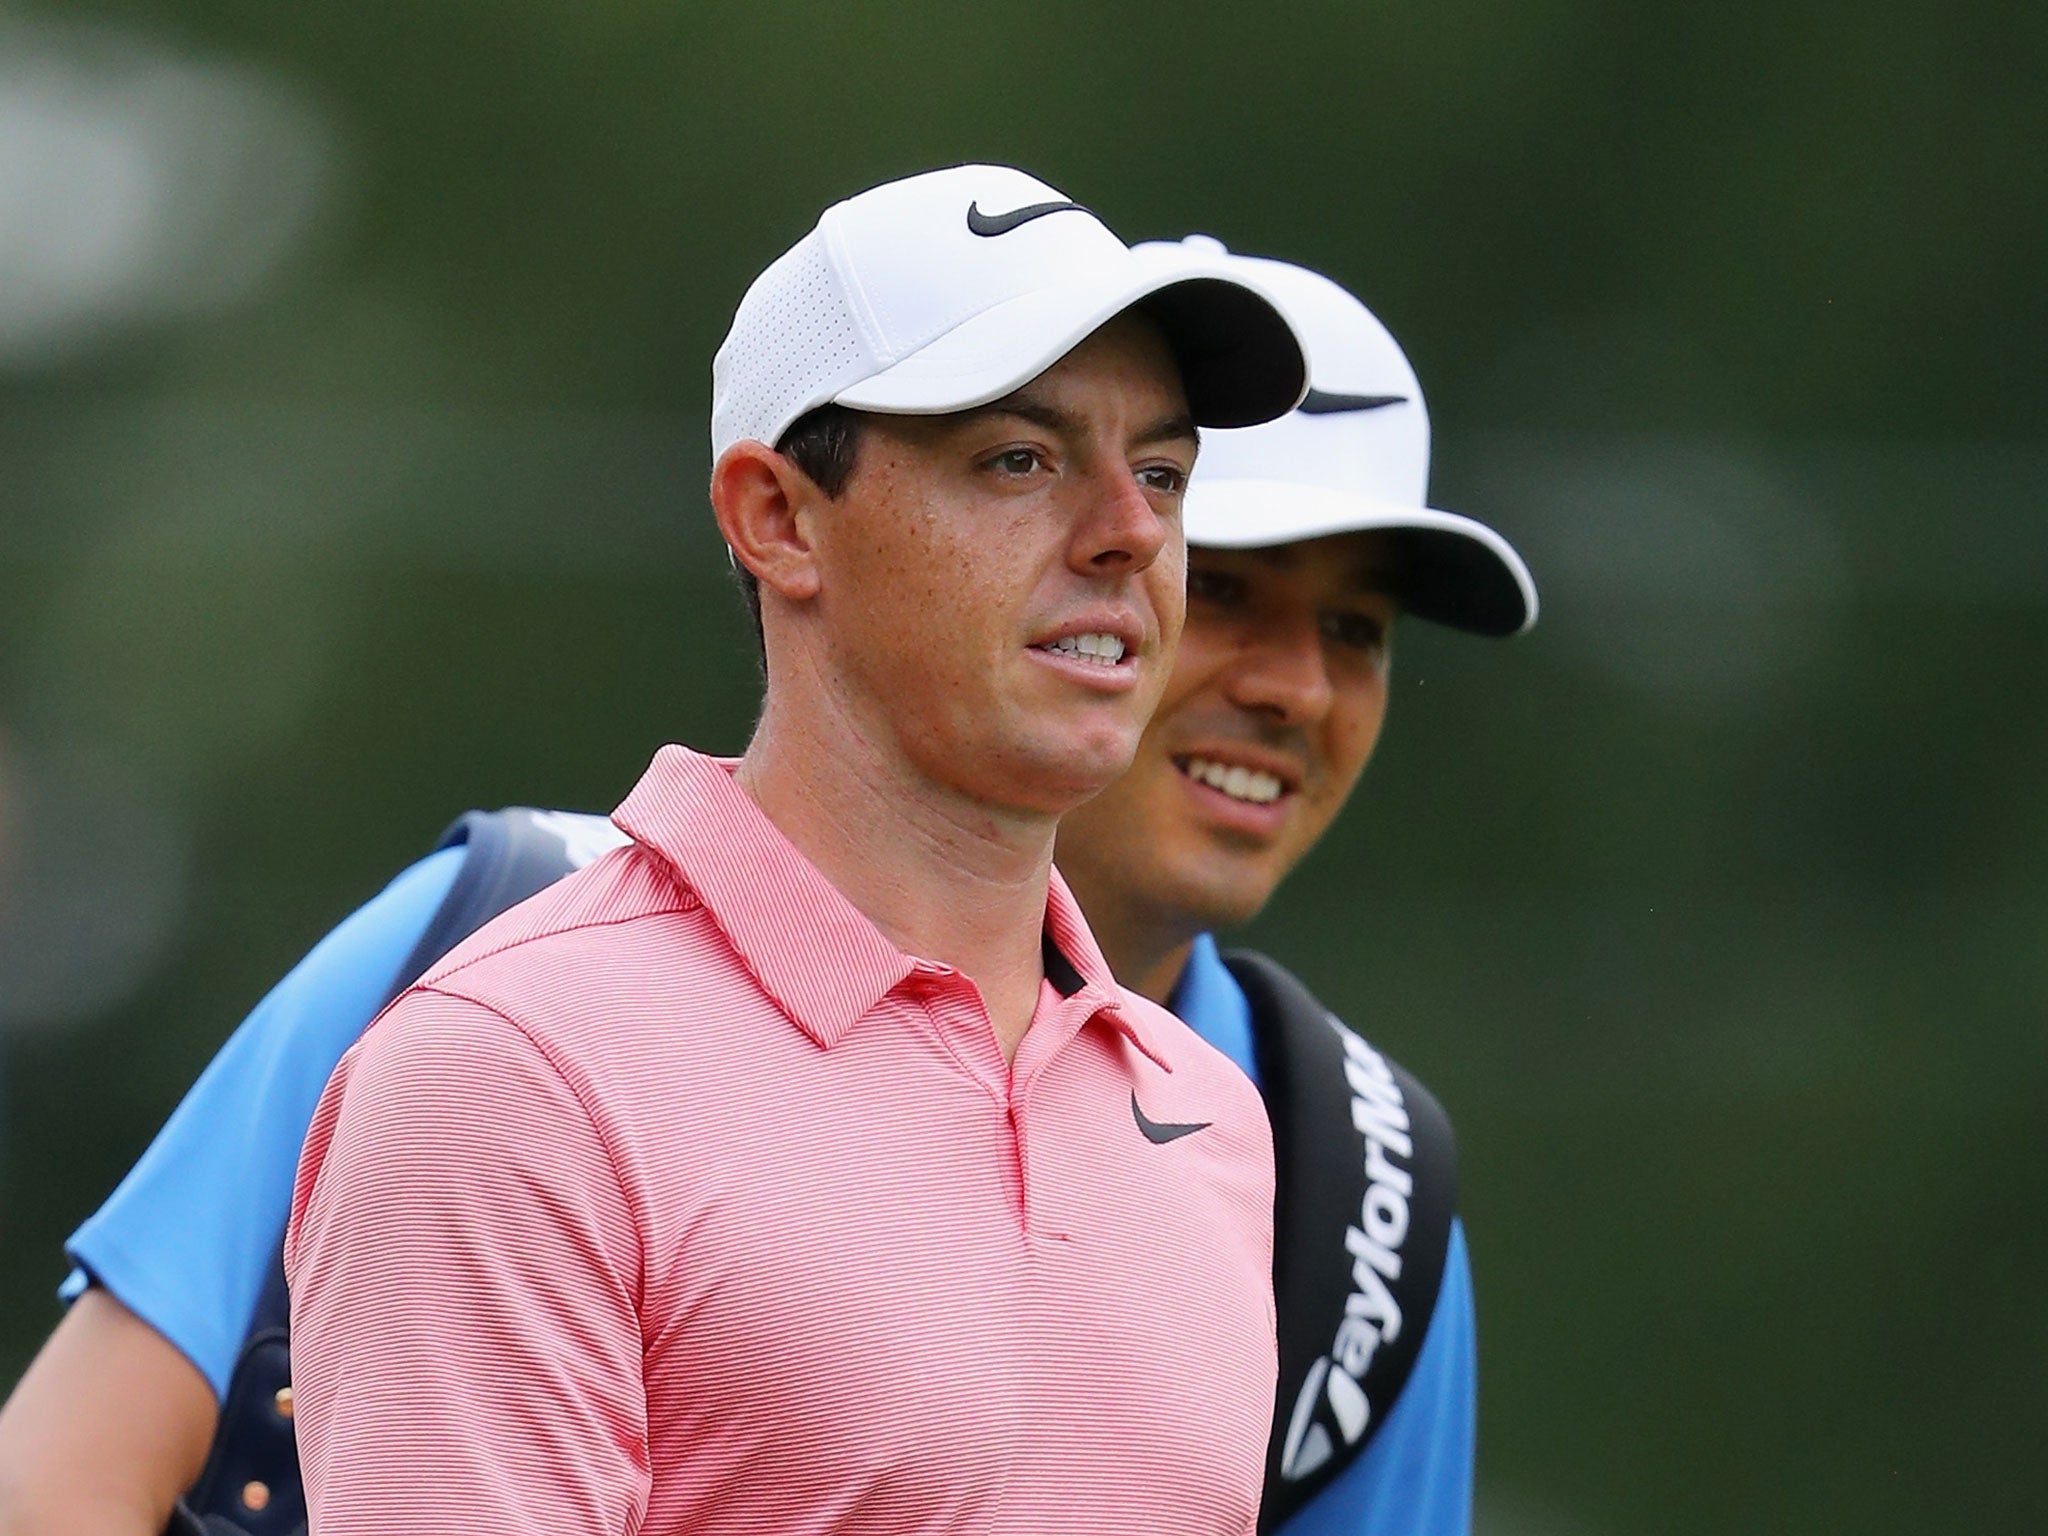 Rory McIlroy has backed plans to move the US PGA Championship to May